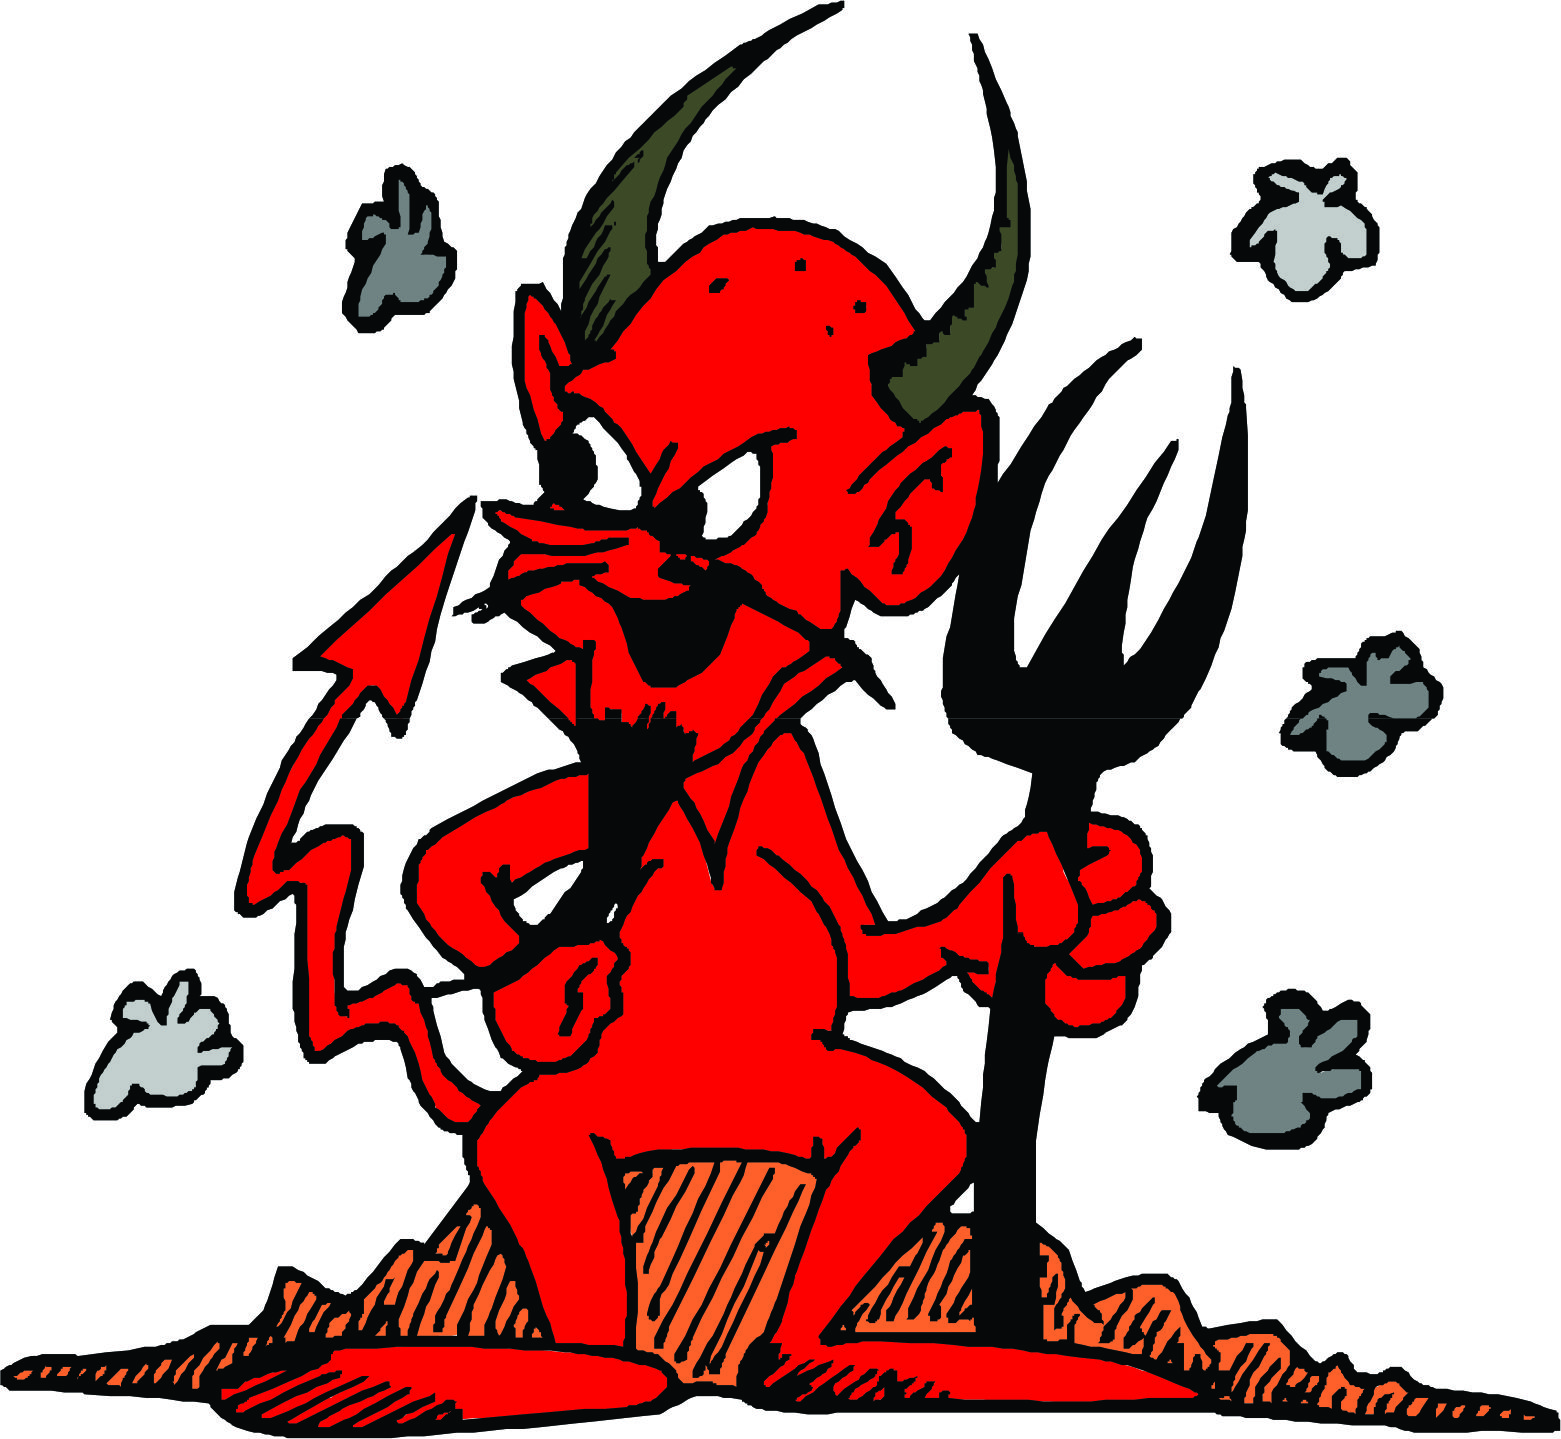 5 Misconceptions About the Devil | Canadian Bible Guy